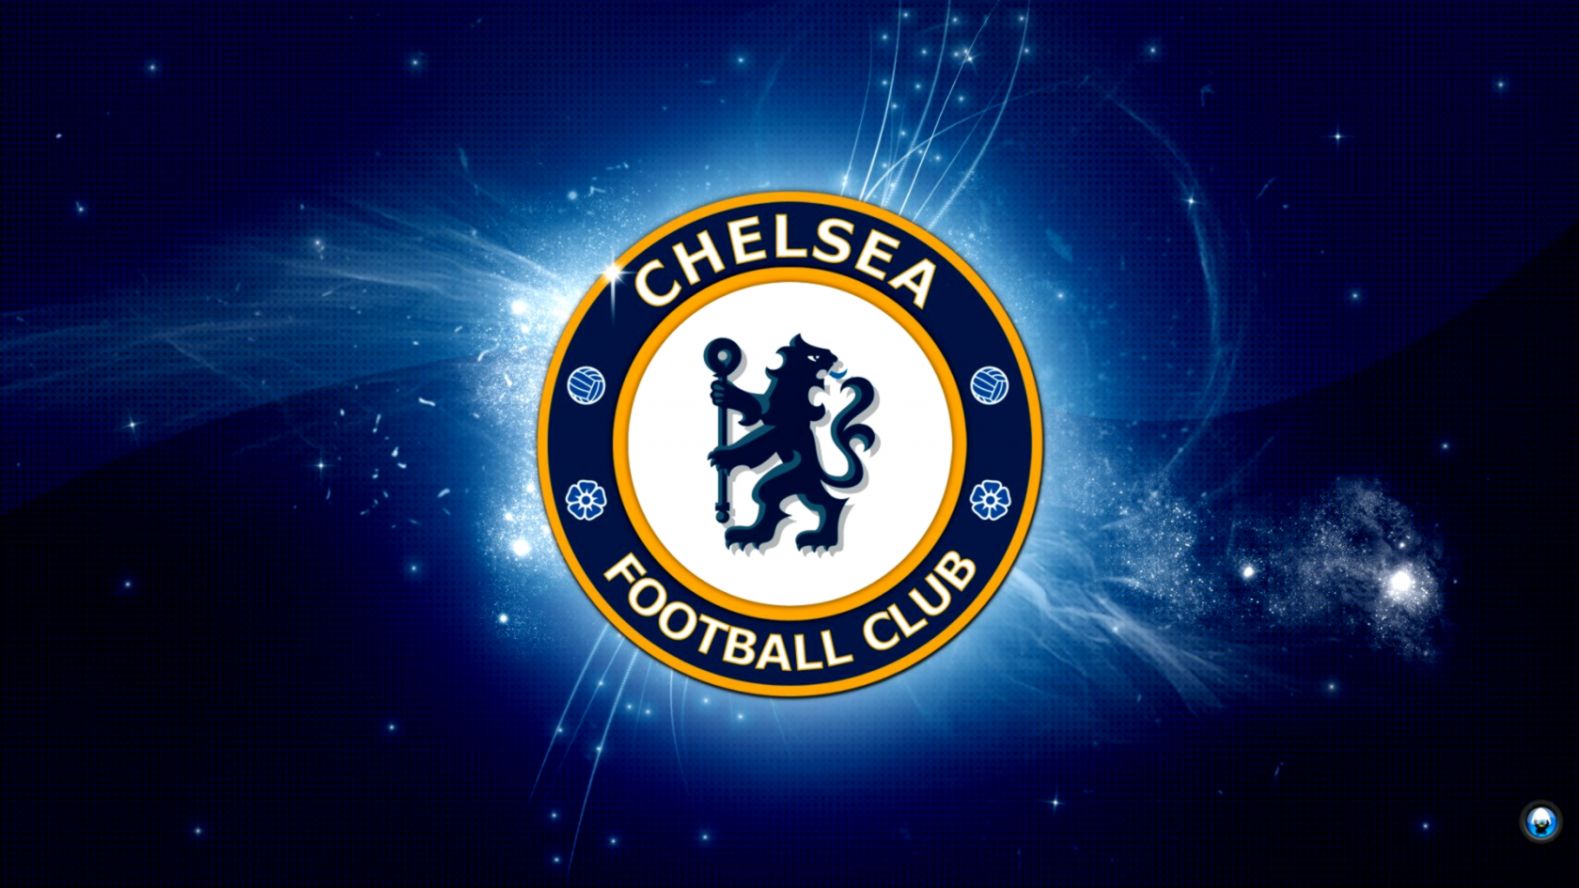 Chelsea Fc Logo 2013 Hd Wallpapers Chainimage - Chelsea Wallpaper Full Hd - HD Wallpaper 